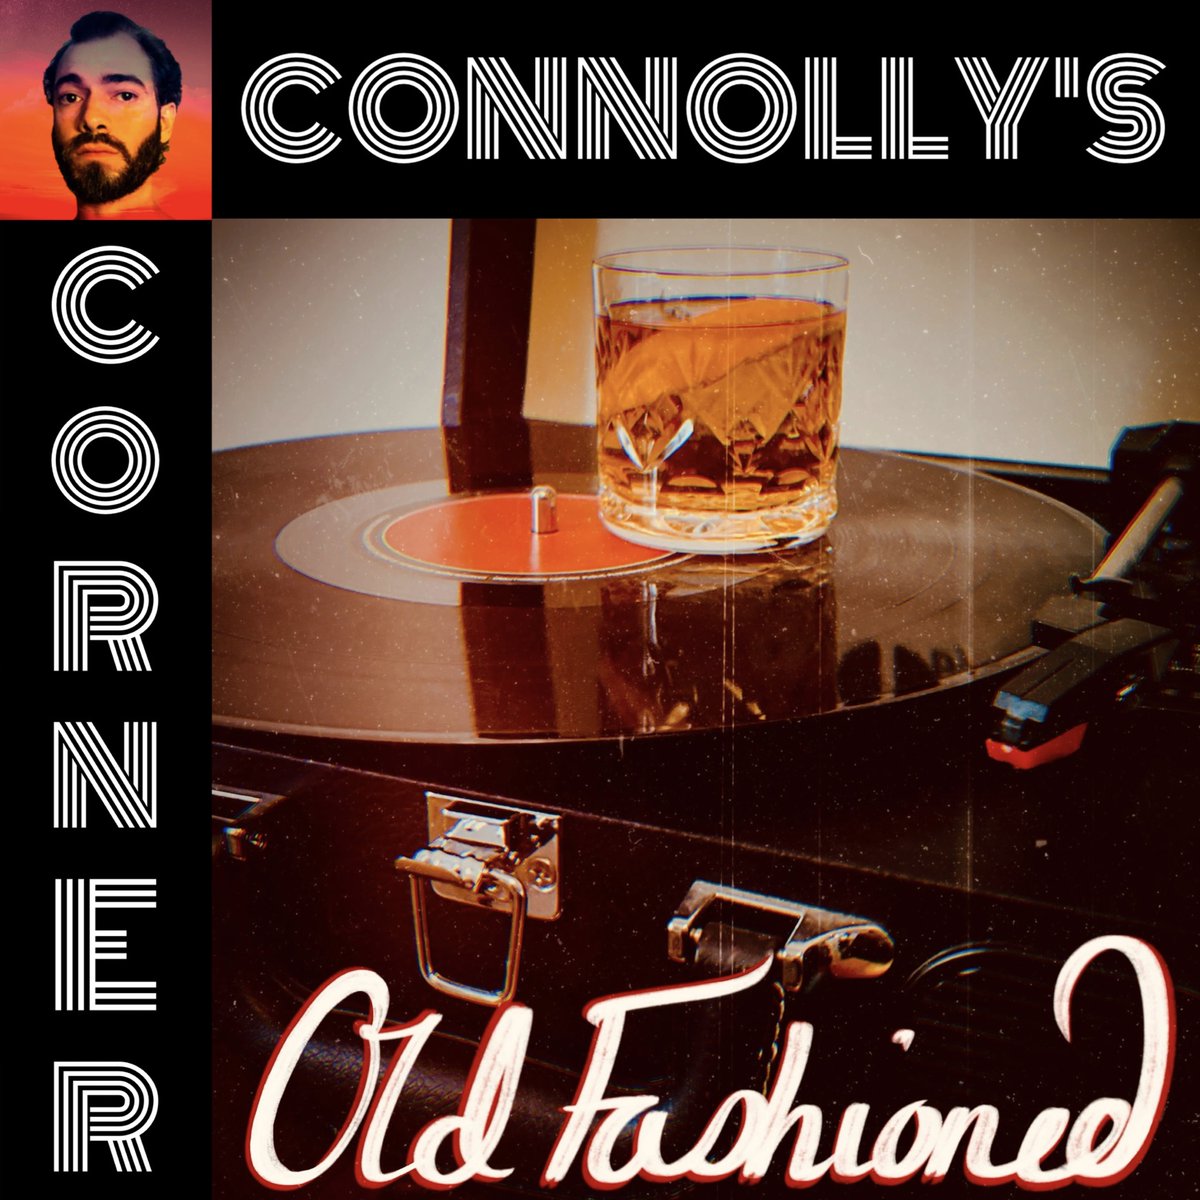 Old Fashioned by @juneholland_

Reviews by @ConnollyTunes talks about a needle and an Old Fashioned. Seems legit. It is!

Tap for more: t.ly/l1EIy or link in bio

#UK #pop #classic #trumpet #CharlesConnolly #ConnollysCorner #NewArtistSpotlight #IWantMyNAS #StopPayola